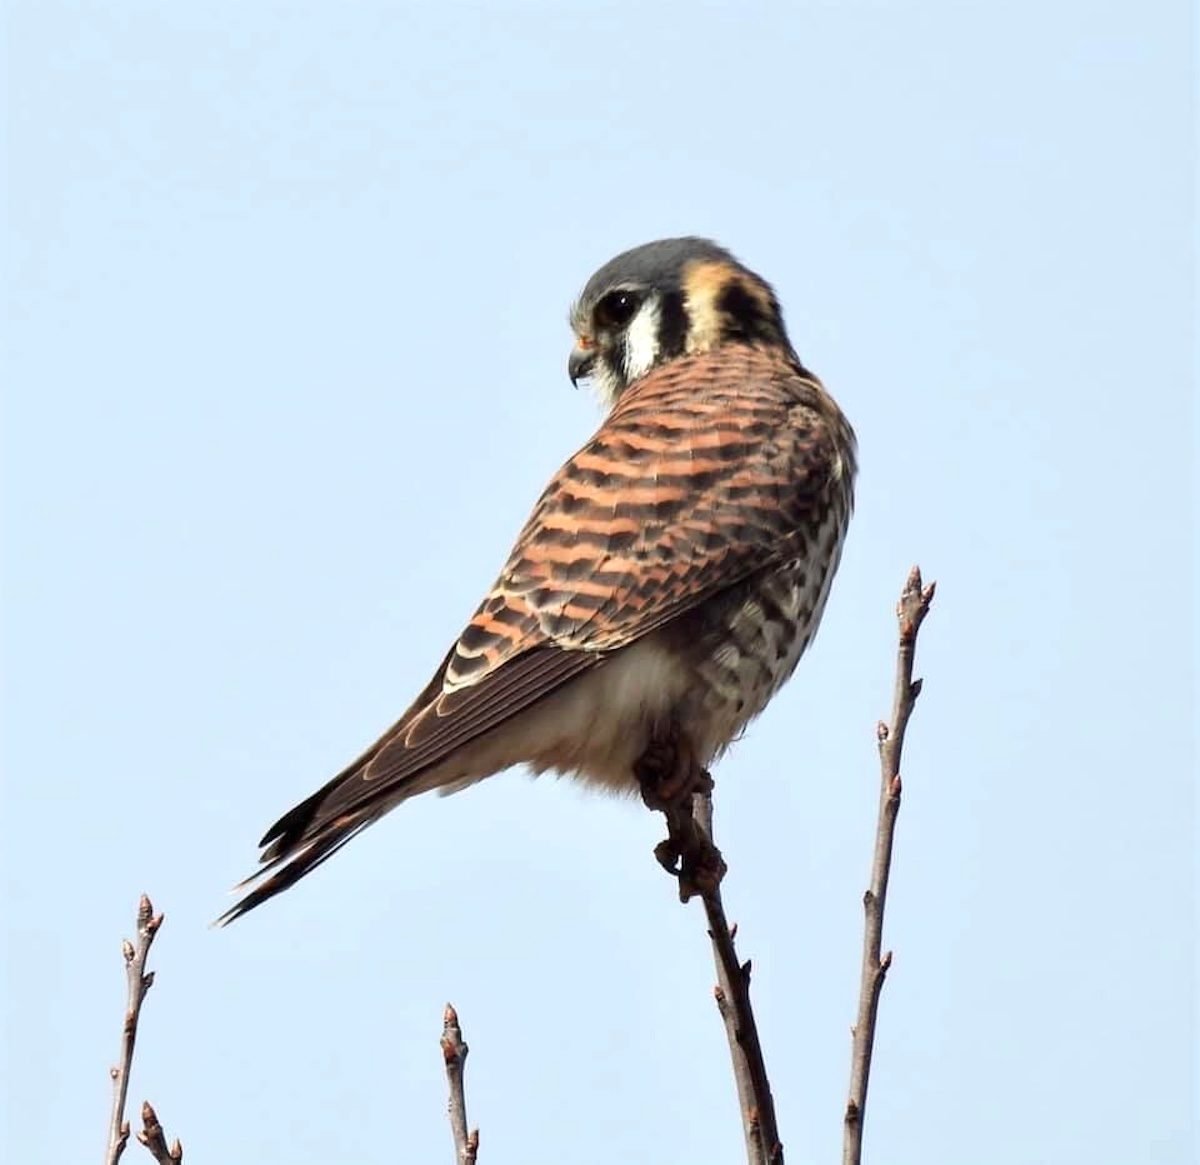 The American Kestrel Is the Smallest Falcon